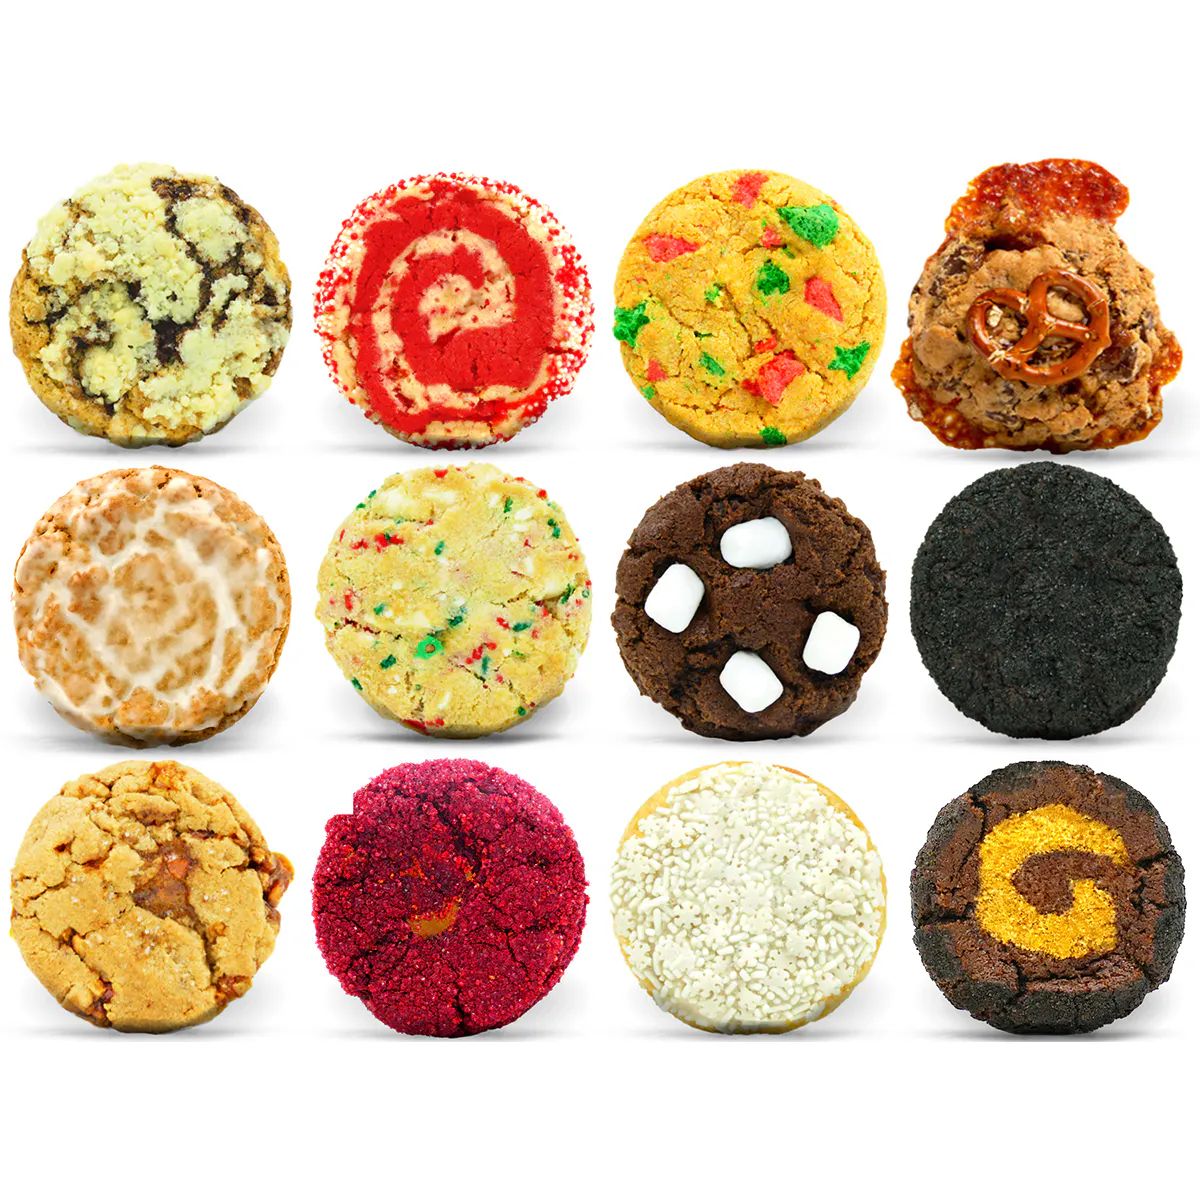 Holiday Cookie Box - 12 Pack by Cookie Good | Goldbelly | Goldbelly